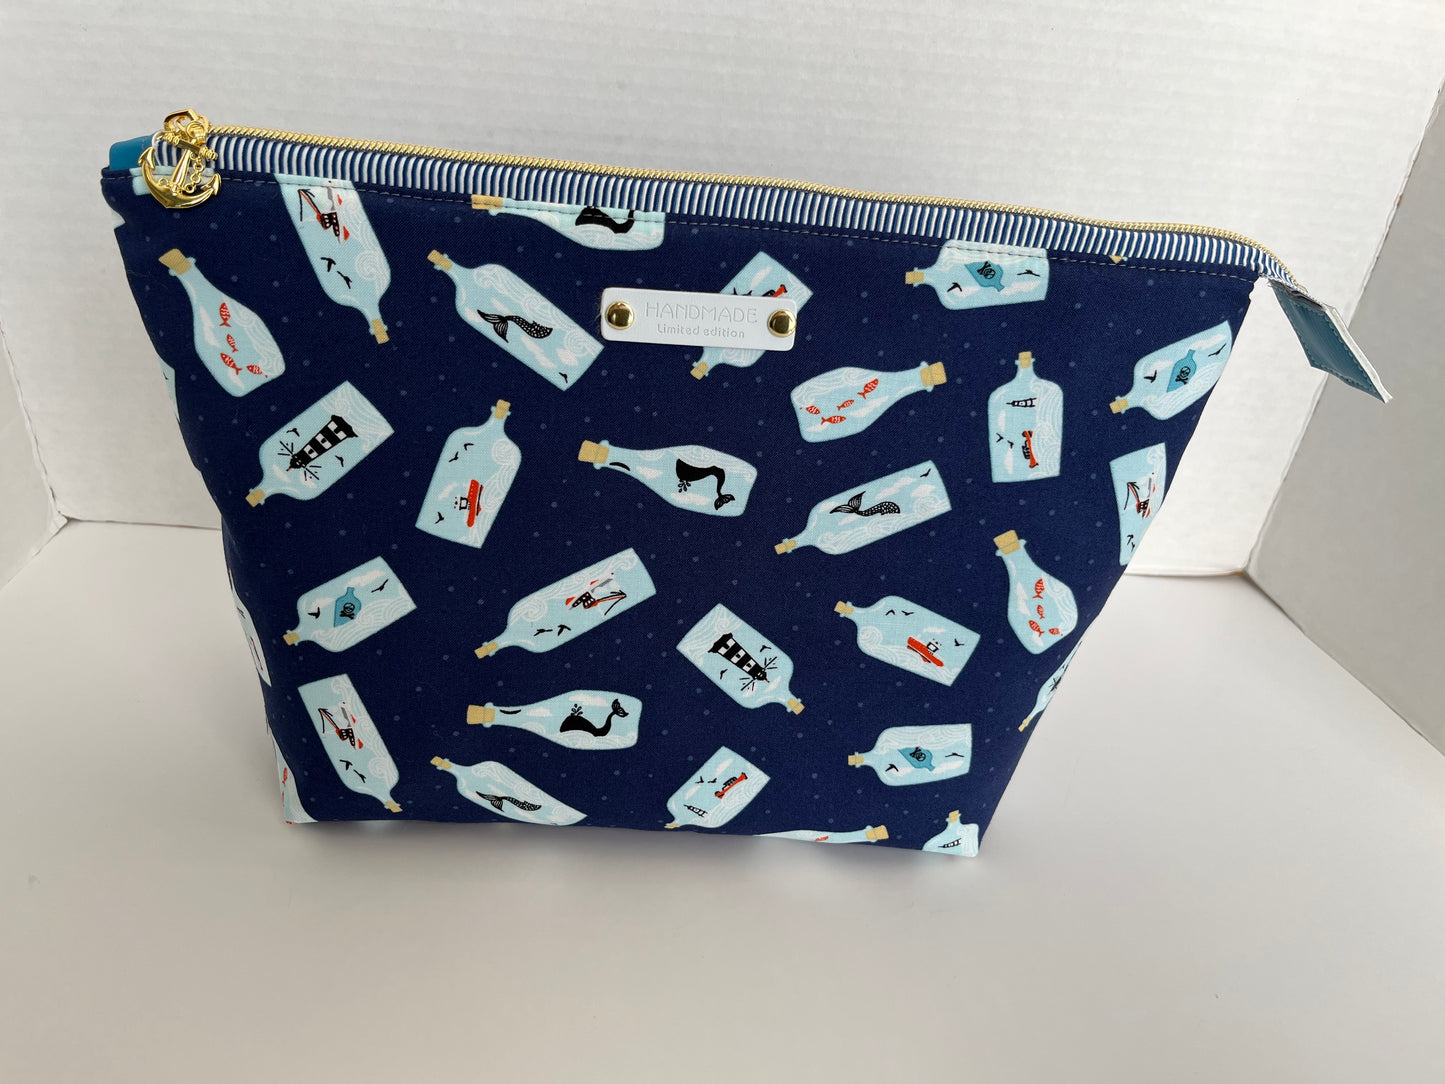 Ship in a Bottle Large Toiletry Bag, Cosmetics Bag, Project Bag